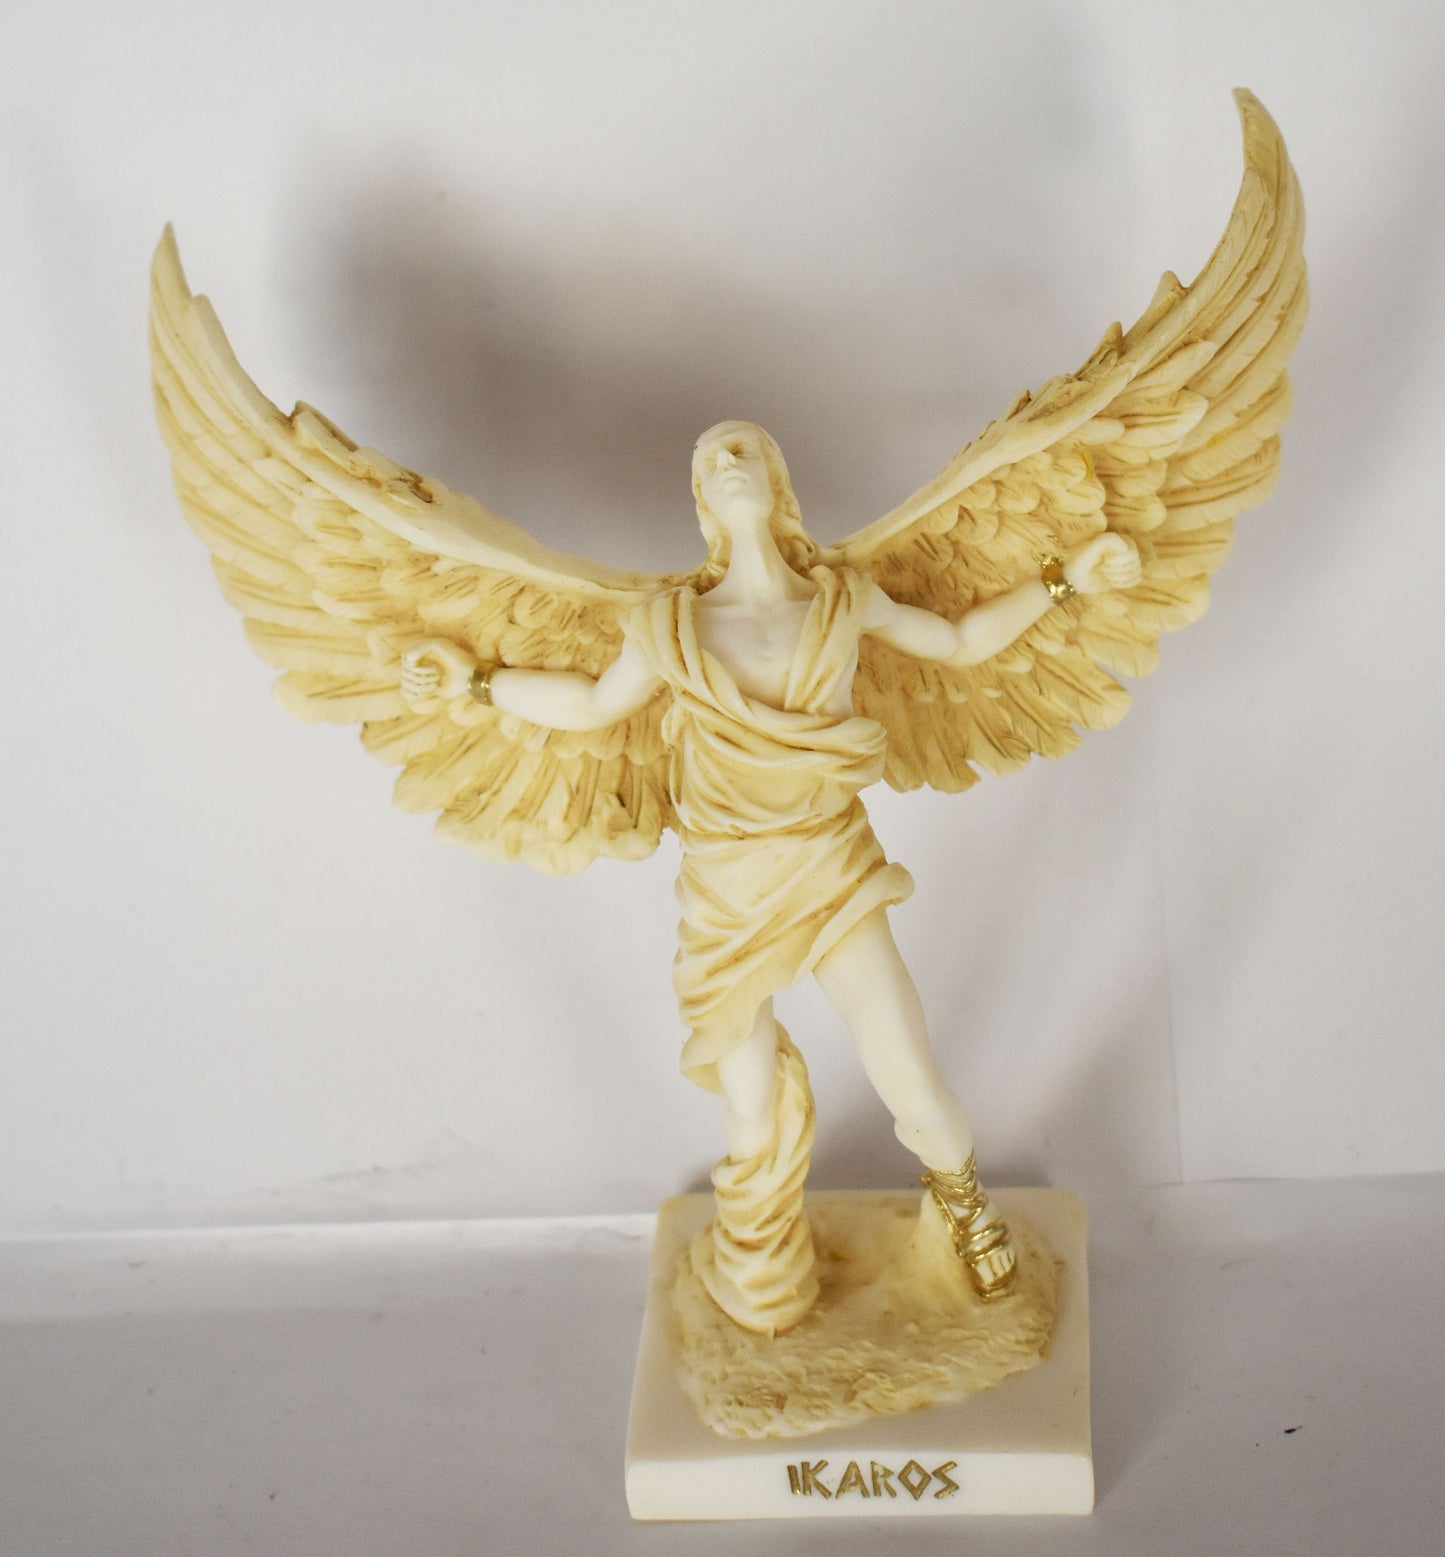 Icarus - Son of Daedalus - Escape from Crete with Wings from Wax and Drowned - Don't Fly Too Close to the Sun - aged alabaster statue